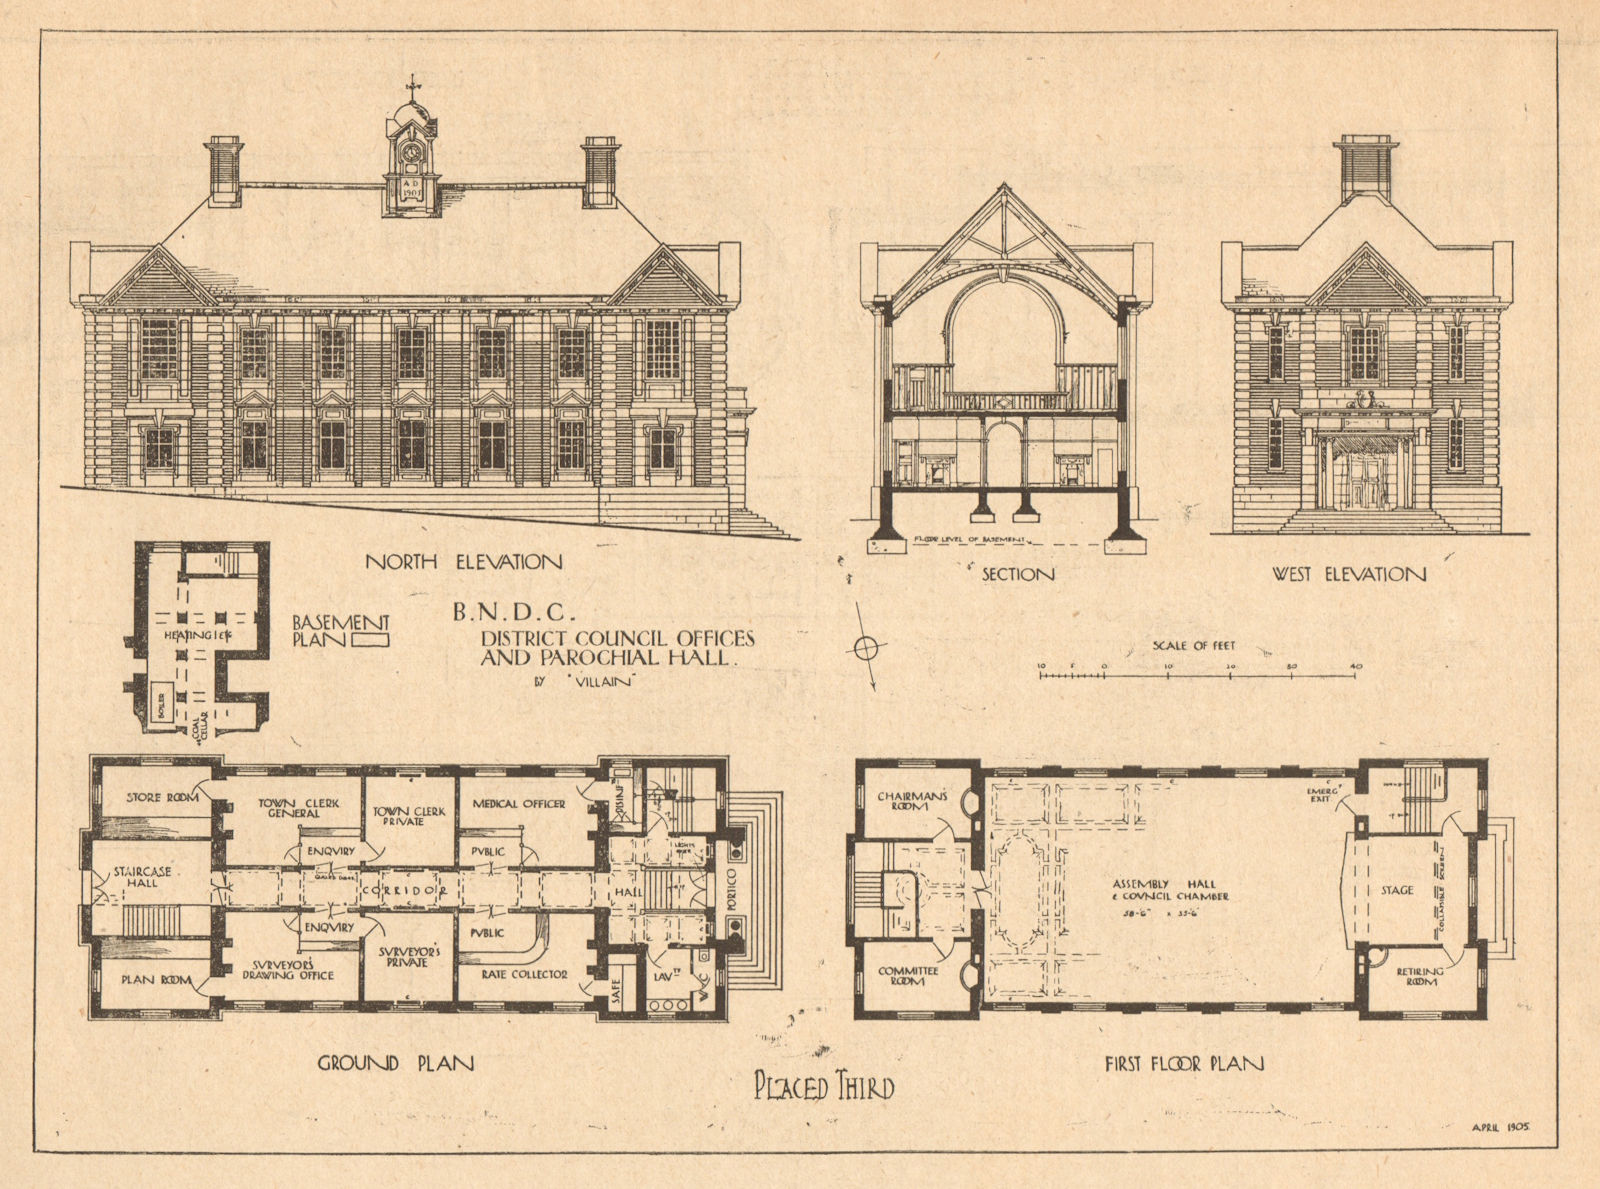 District council offices & parochial hall by Villain. View elevation plan 1905